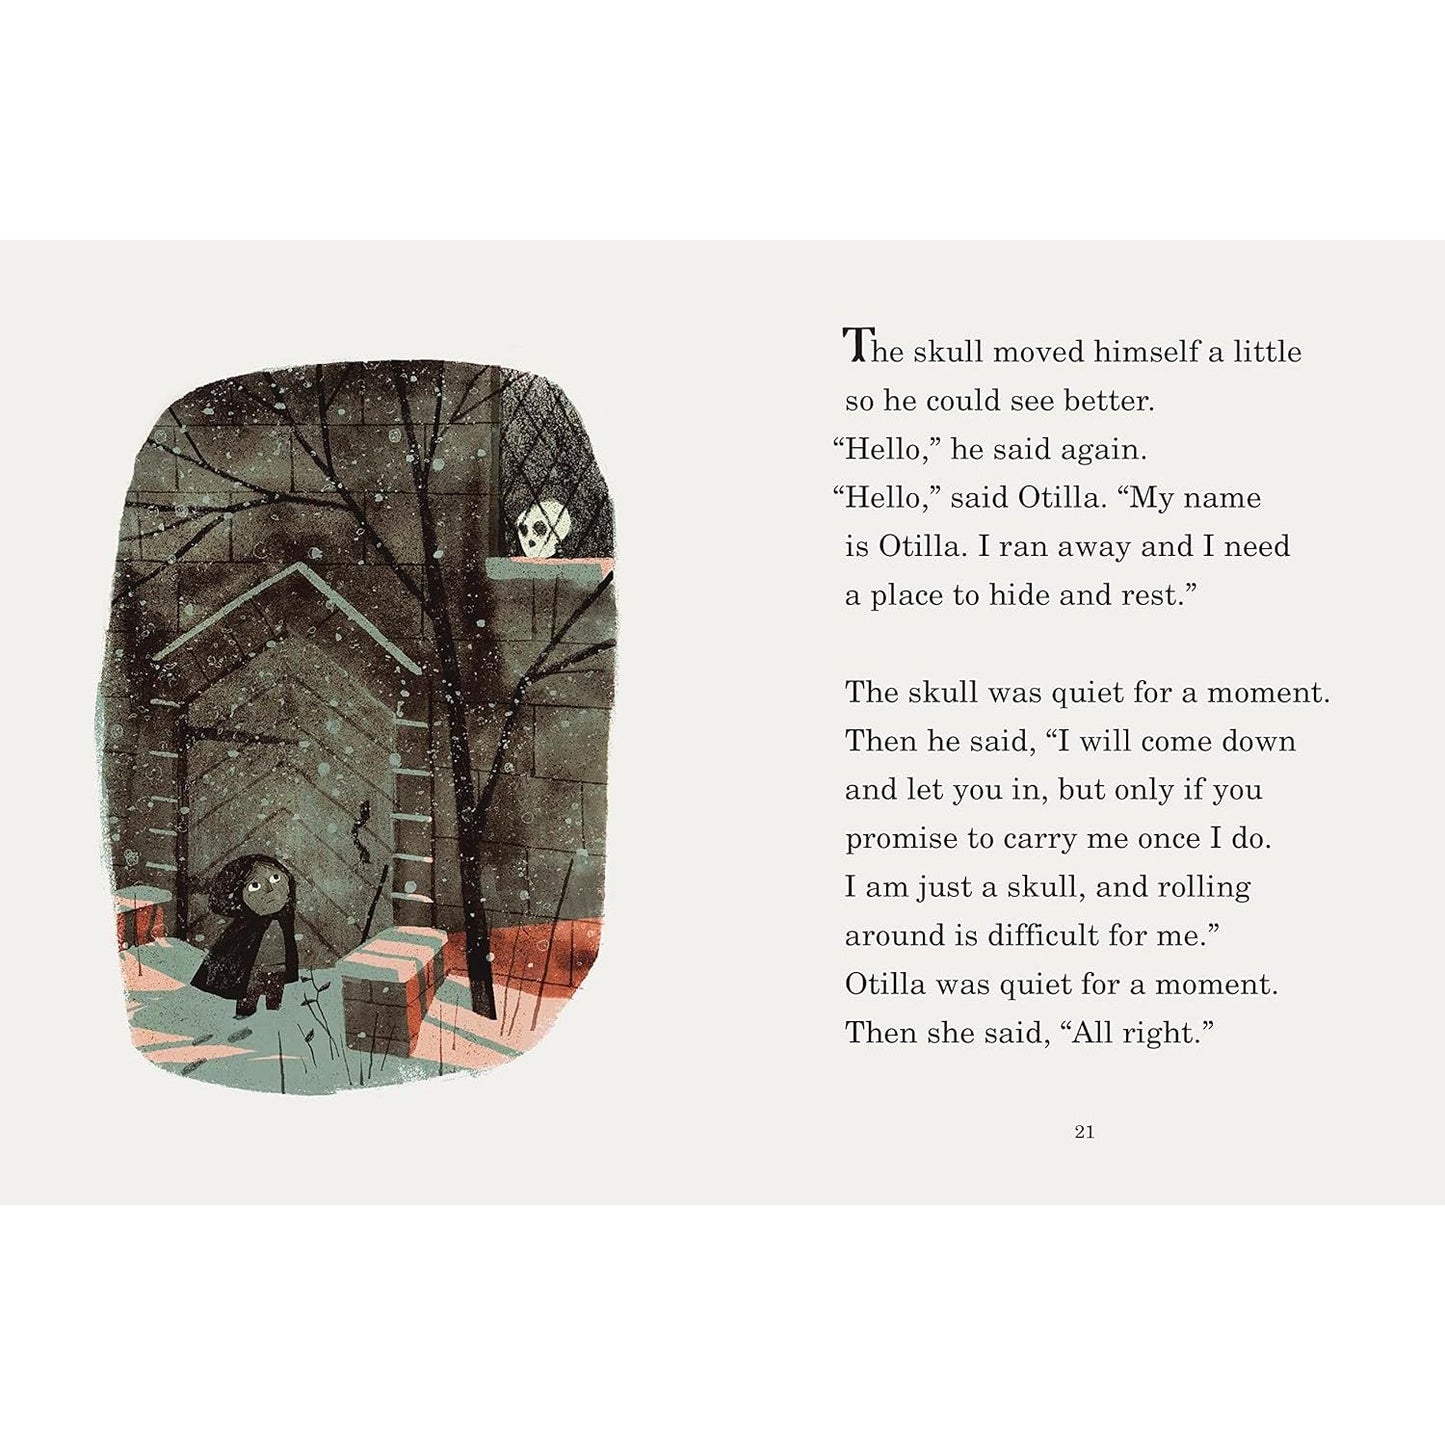 The Skull: A Tyrolean Folktale - Hardcover Picture Book